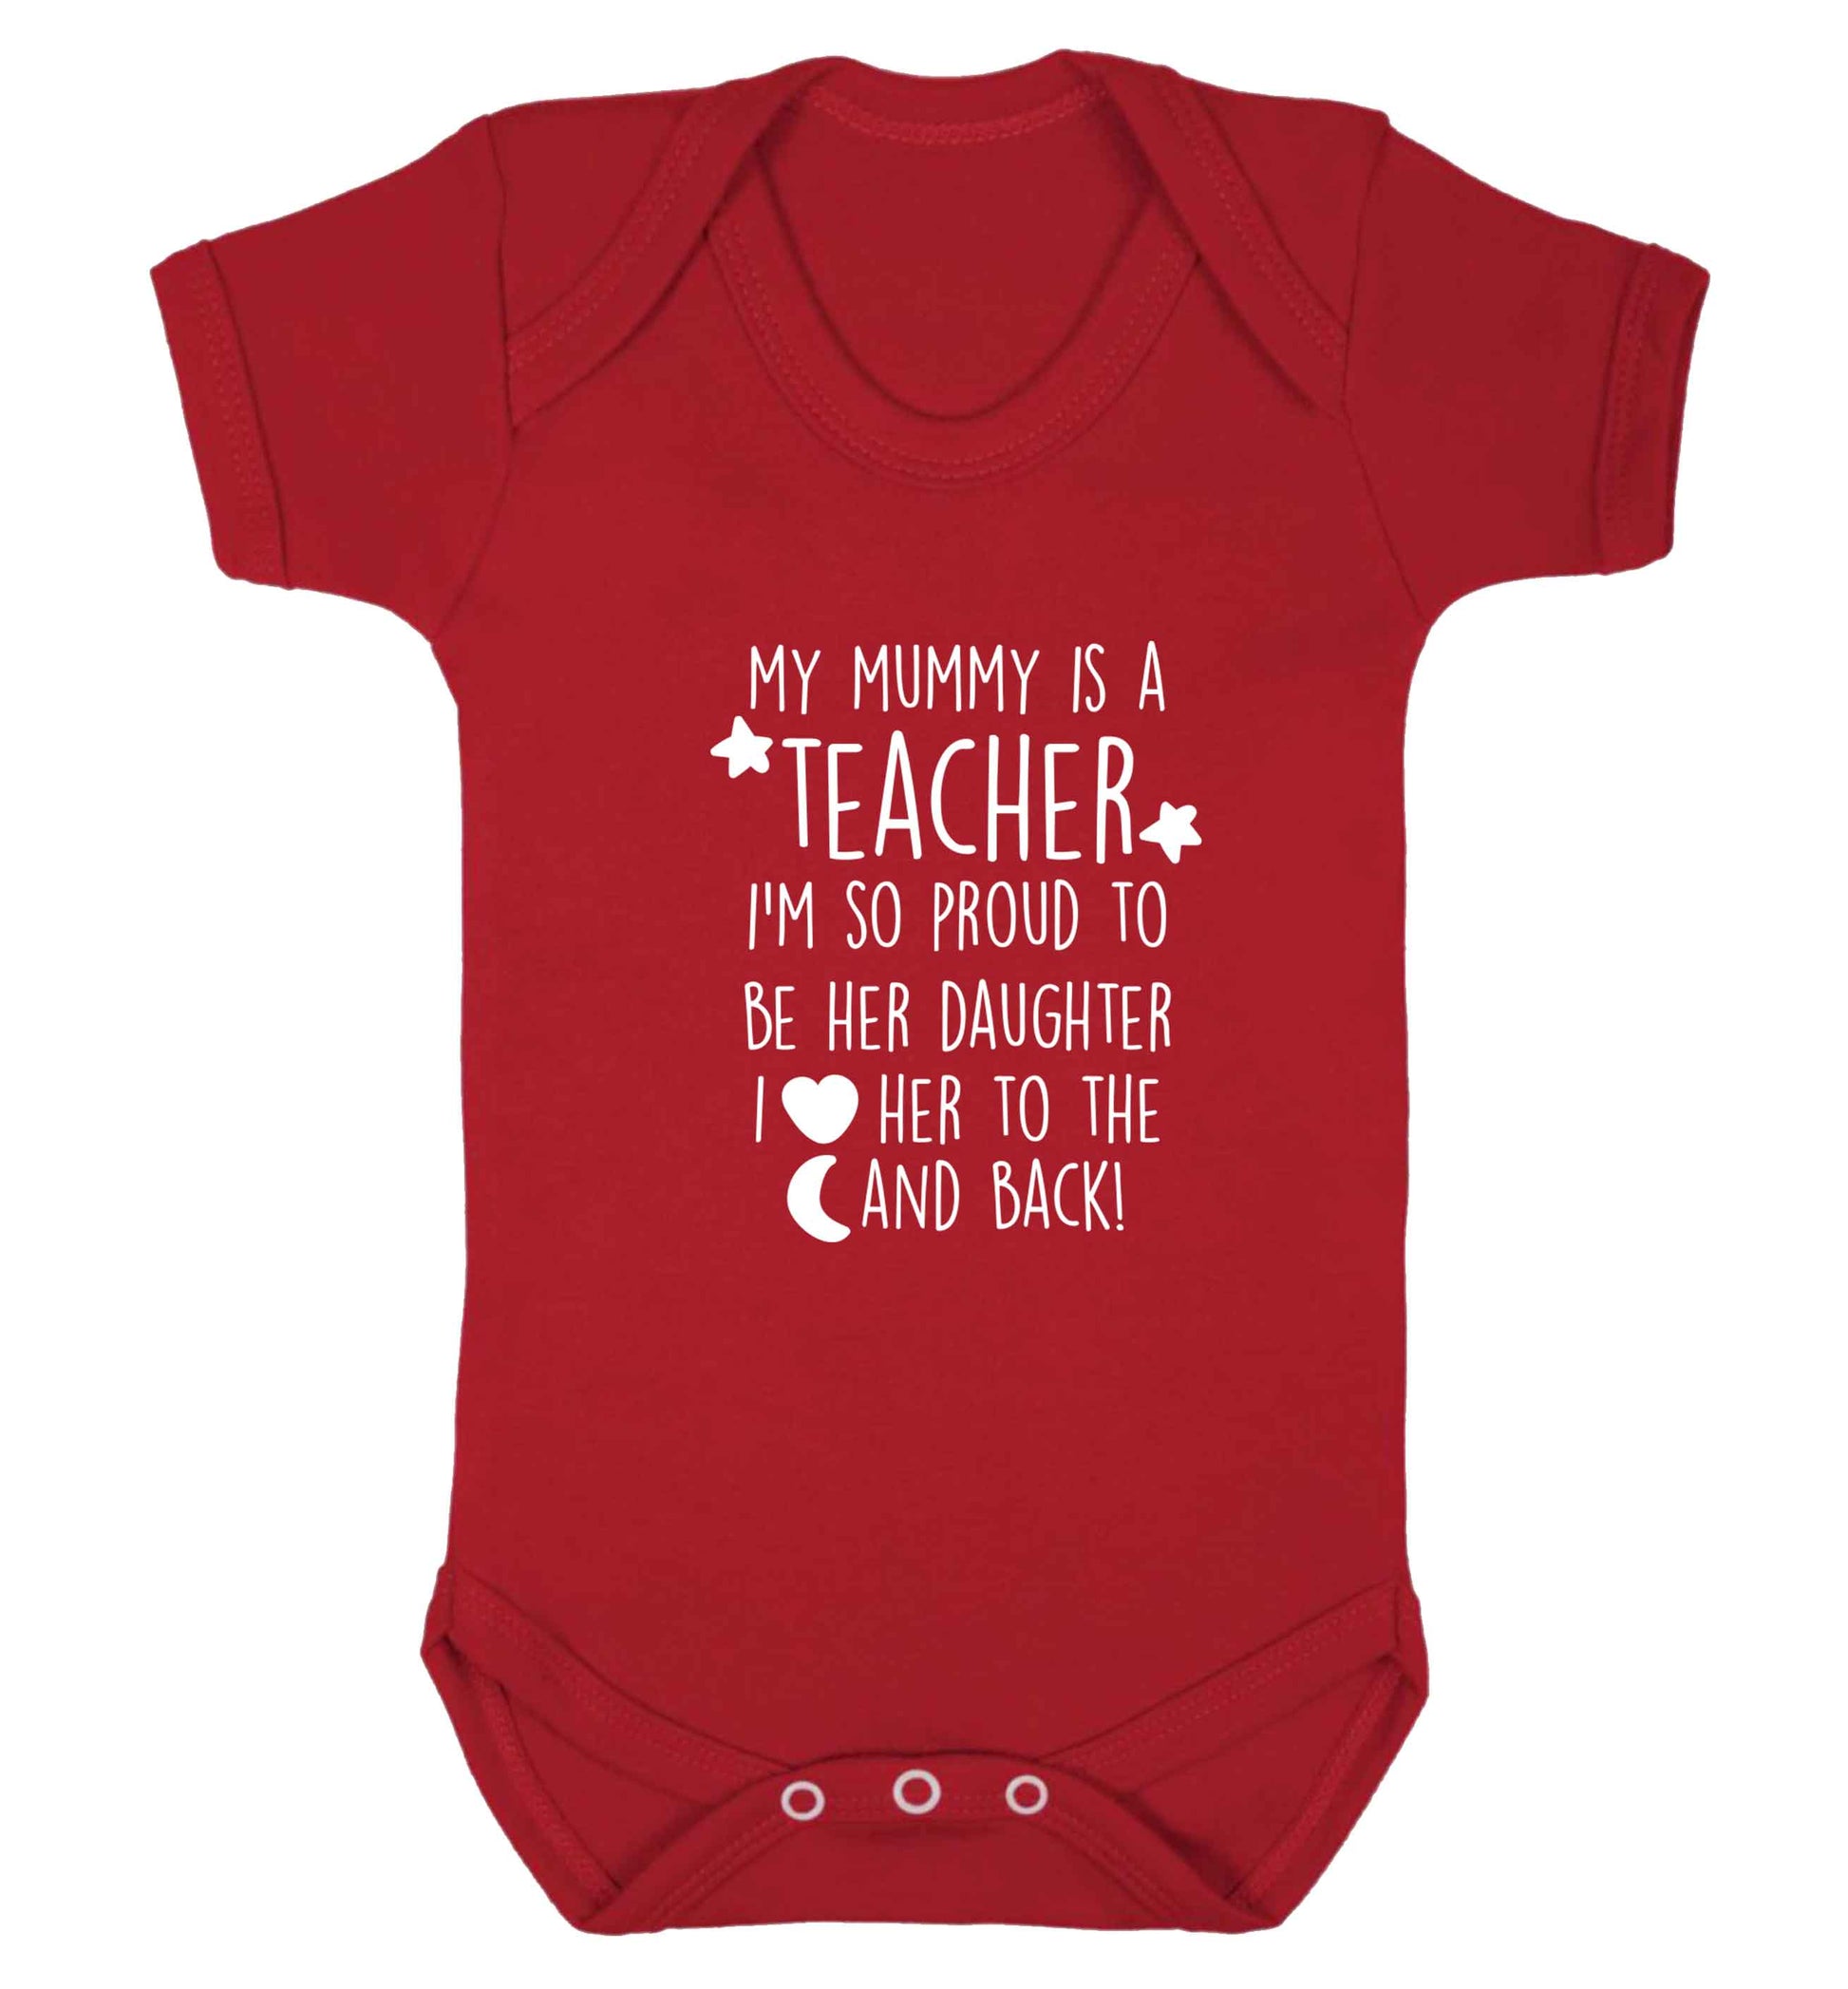 My mummy is a teacher I'm so proud to be her daughter I love her to the moon and back baby vest red 18-24 months